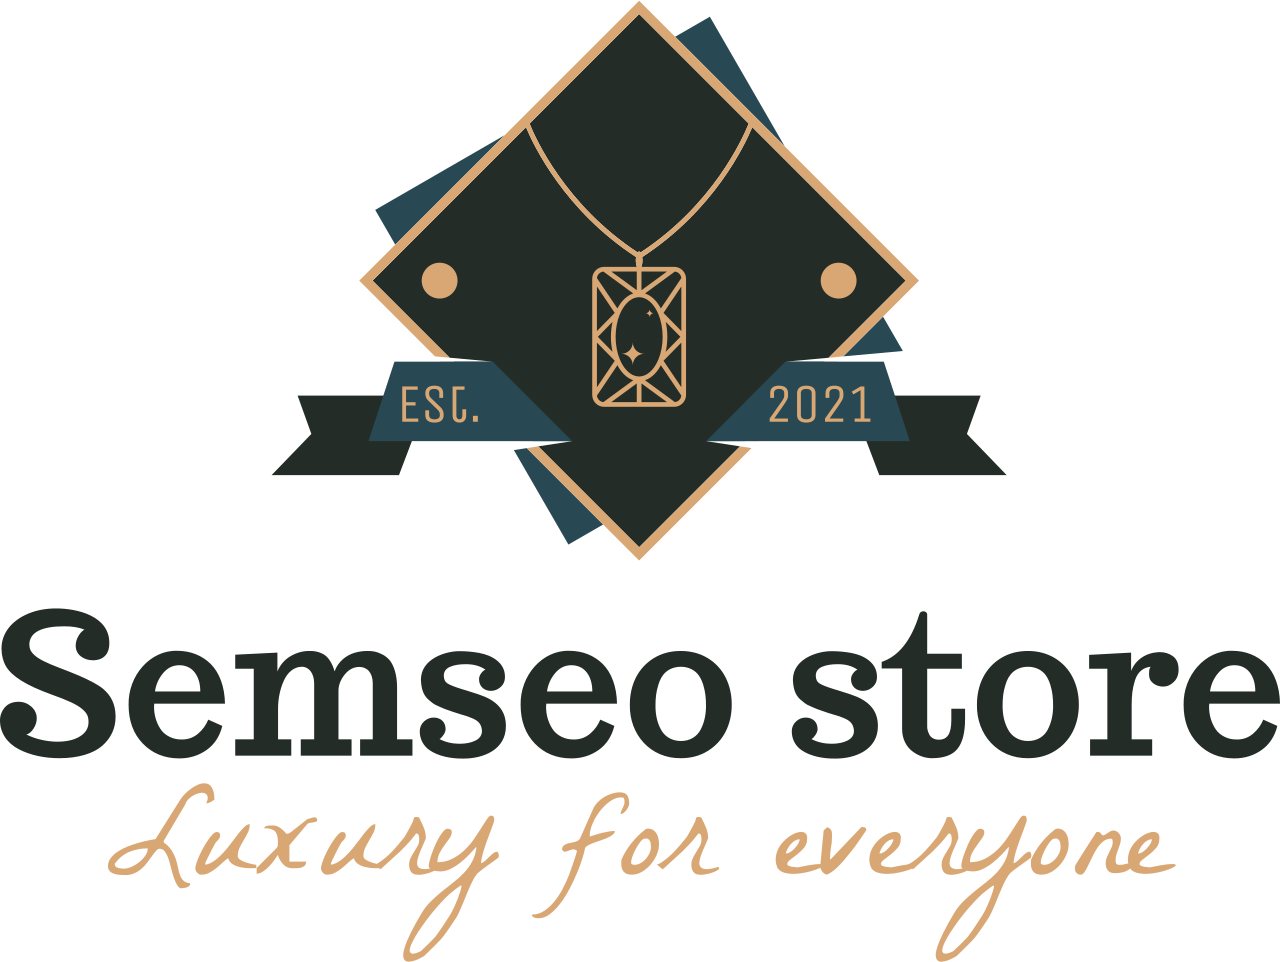 SEMSEO Store